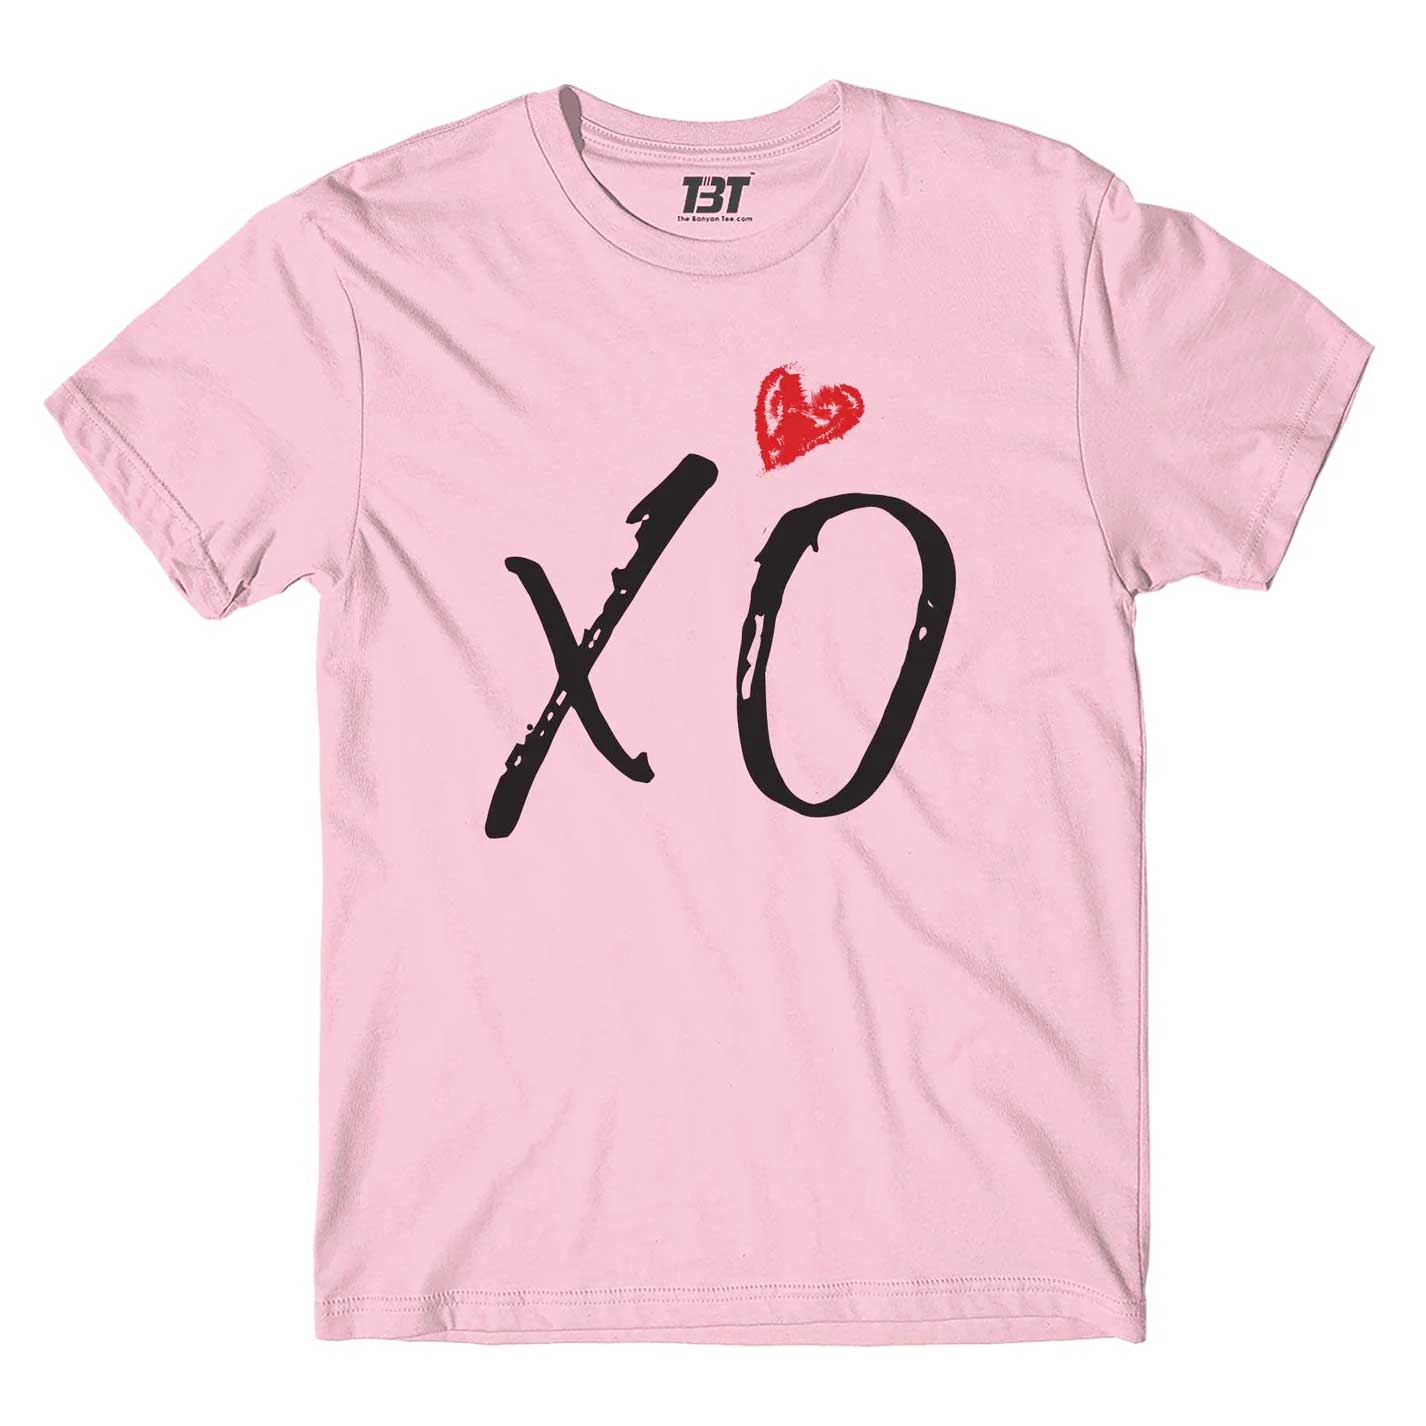 The Weeknd T Shirt - XO M (Chest 40 in) / Baby Pink